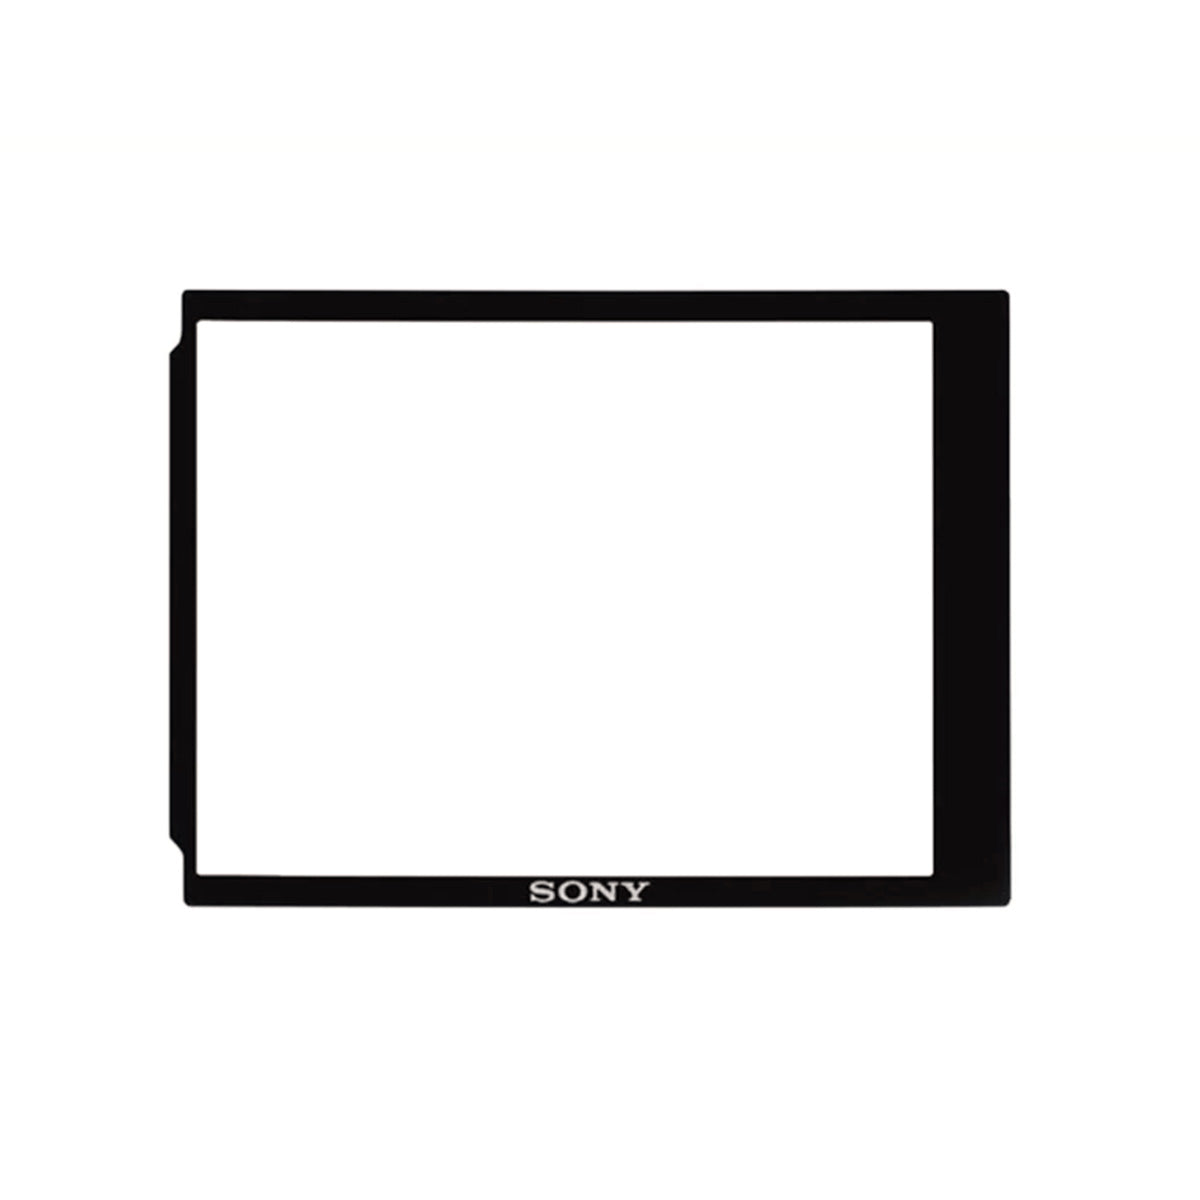 Sony LCD Screen Protector for Select Sony Cameras